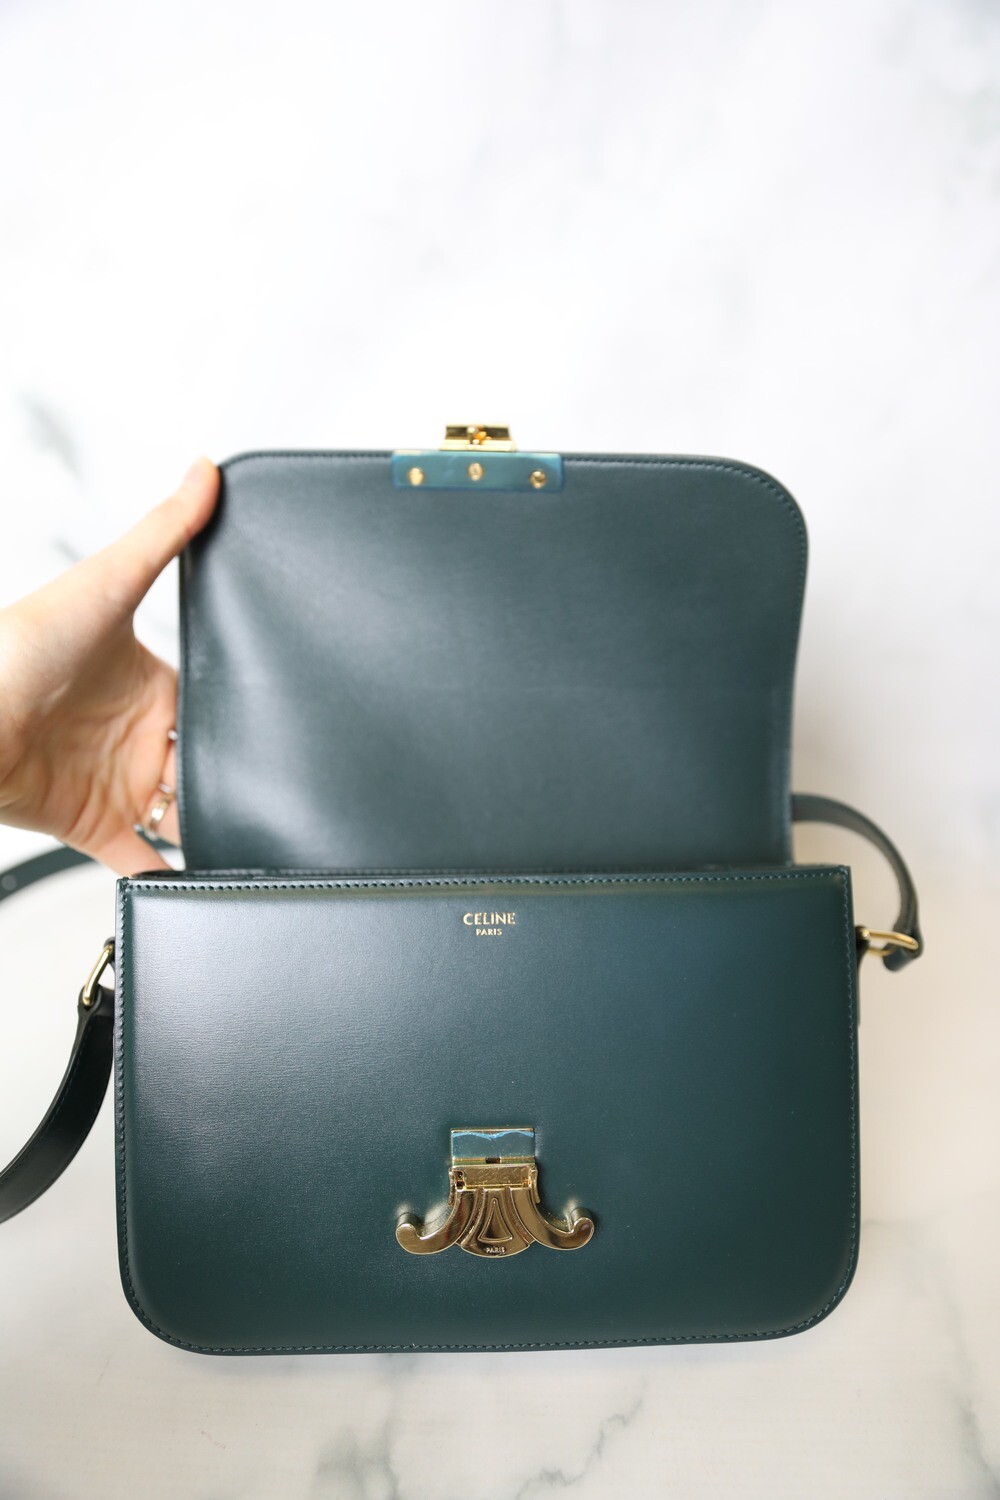 Celine Triomphe Medium, Green with Gold Hardware, Preowned in 